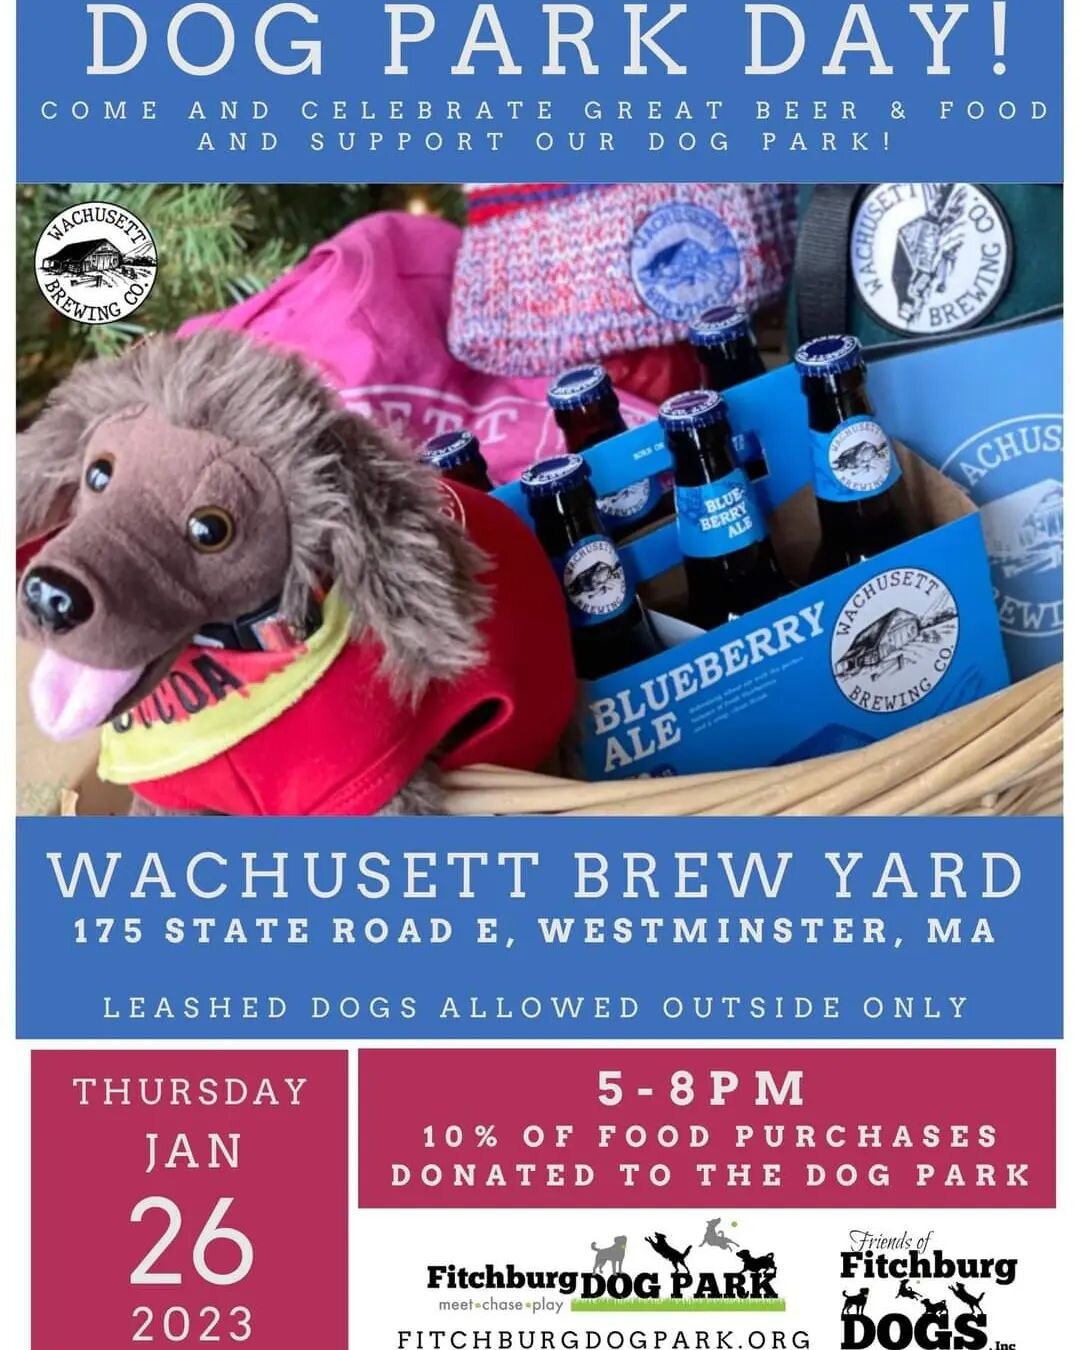 Wachusett Brew Yard will be donating 10% of food sales to the Fitchburg Dog Park Fund from 5pm to 8pm on Thursday January 26th, 2023

The Fitchburg Dog Park will receive 10% of the food sales to the dog park for dinner! Just let them know you are the